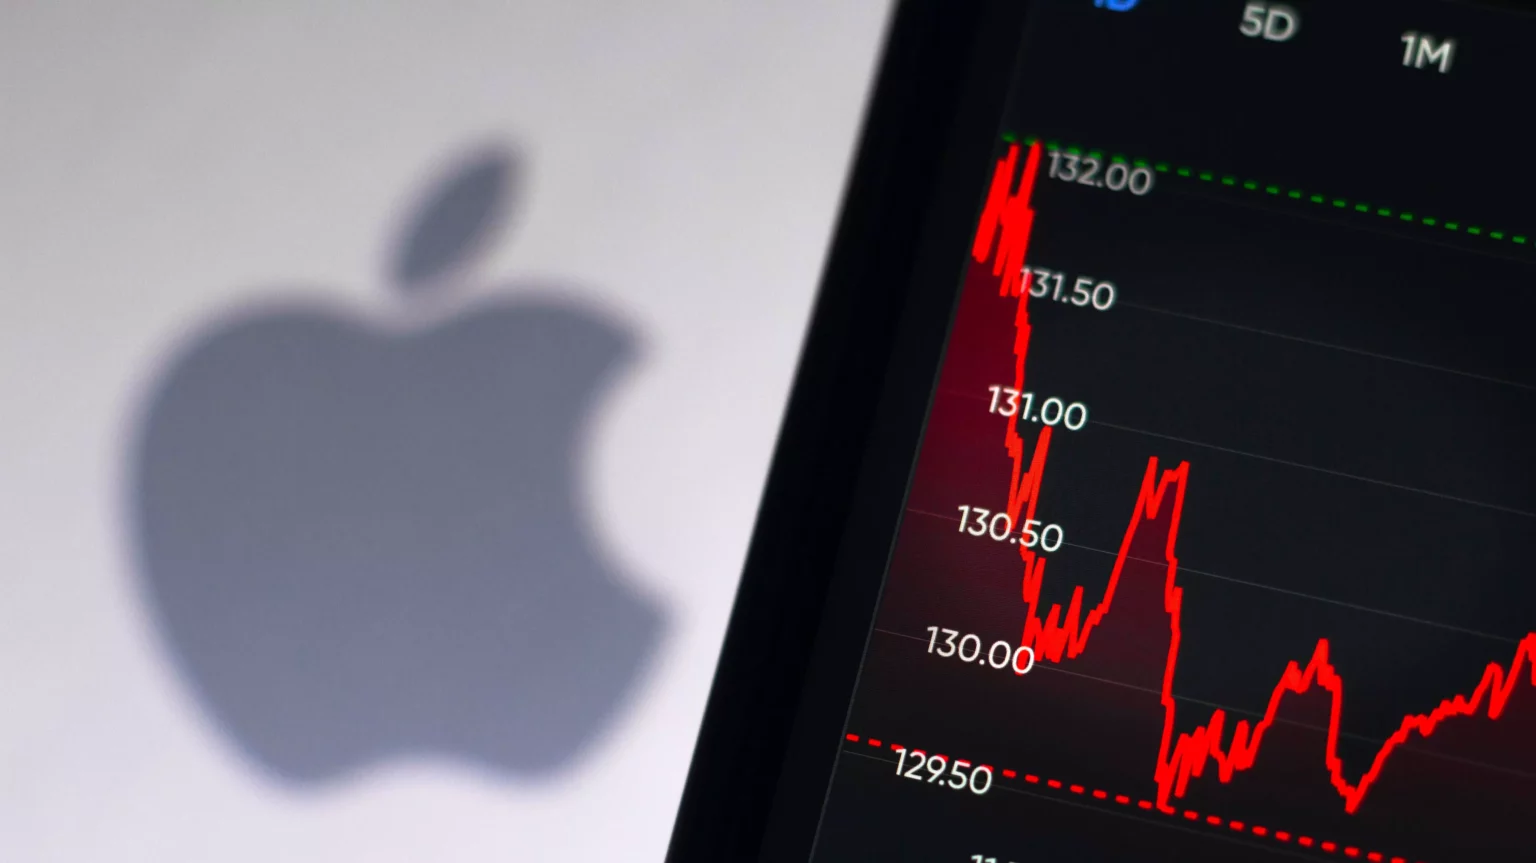 apple-stock-fell-sharply-for-a-second-straight-session-following-reports-of-china-iphone-restrictions